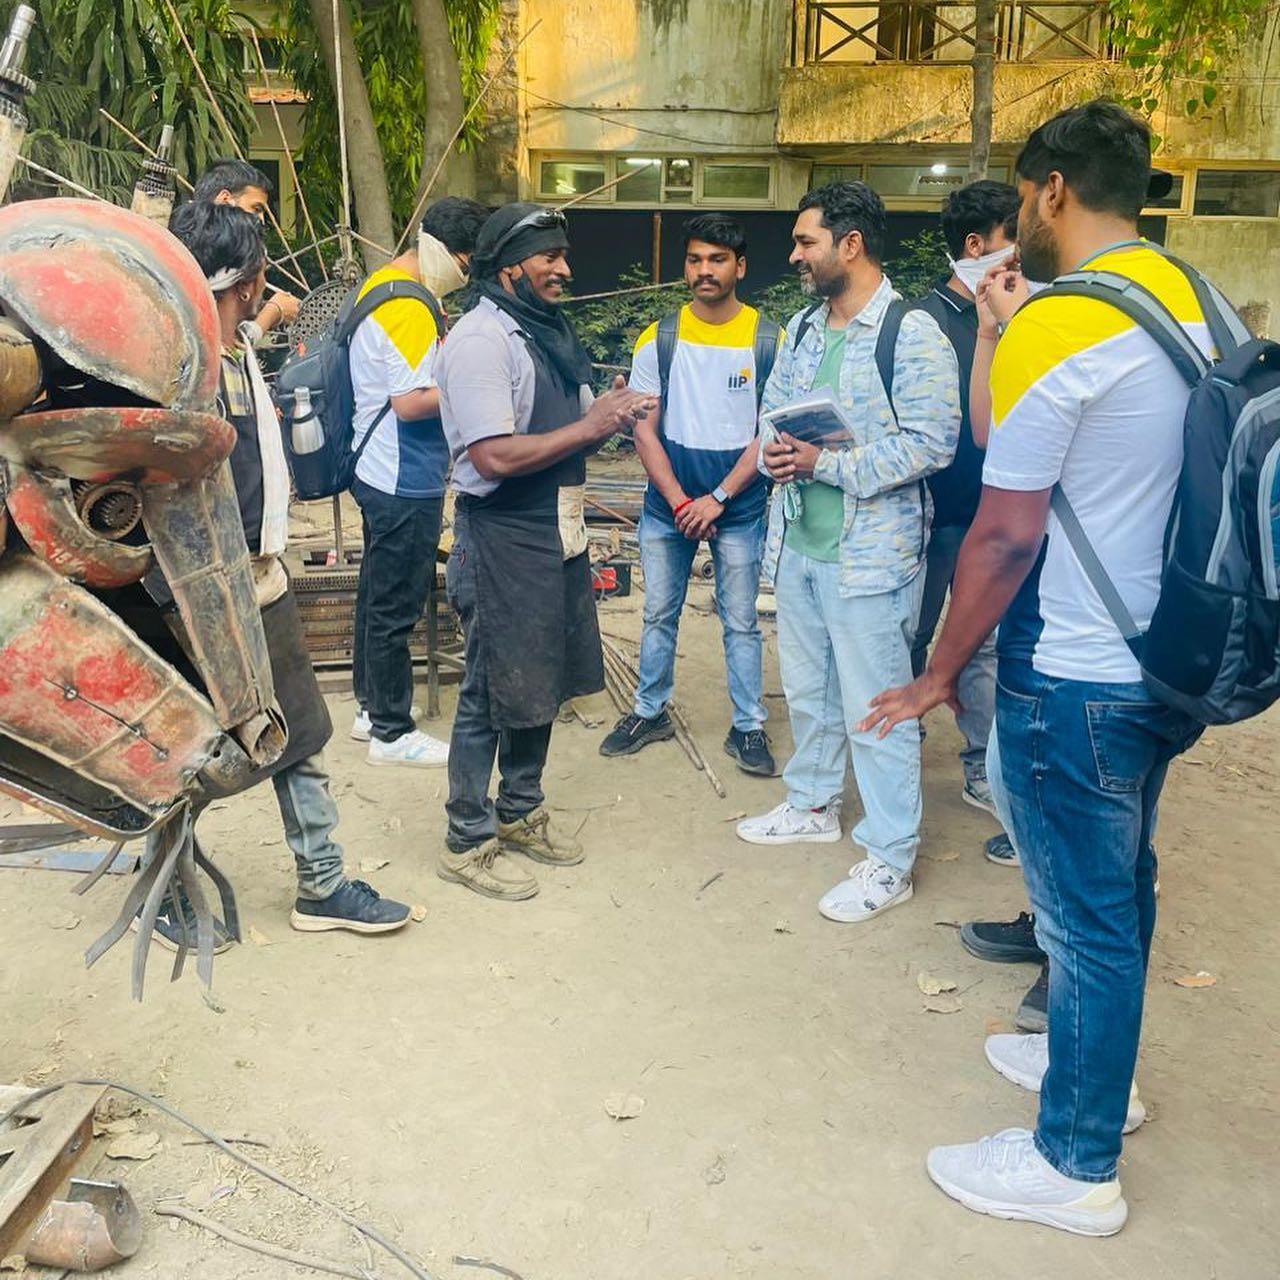 Students of IIPCCA visited Garhi with their mentors to learn and gain the process of making beautiful sculptures and the precision artists put in waste